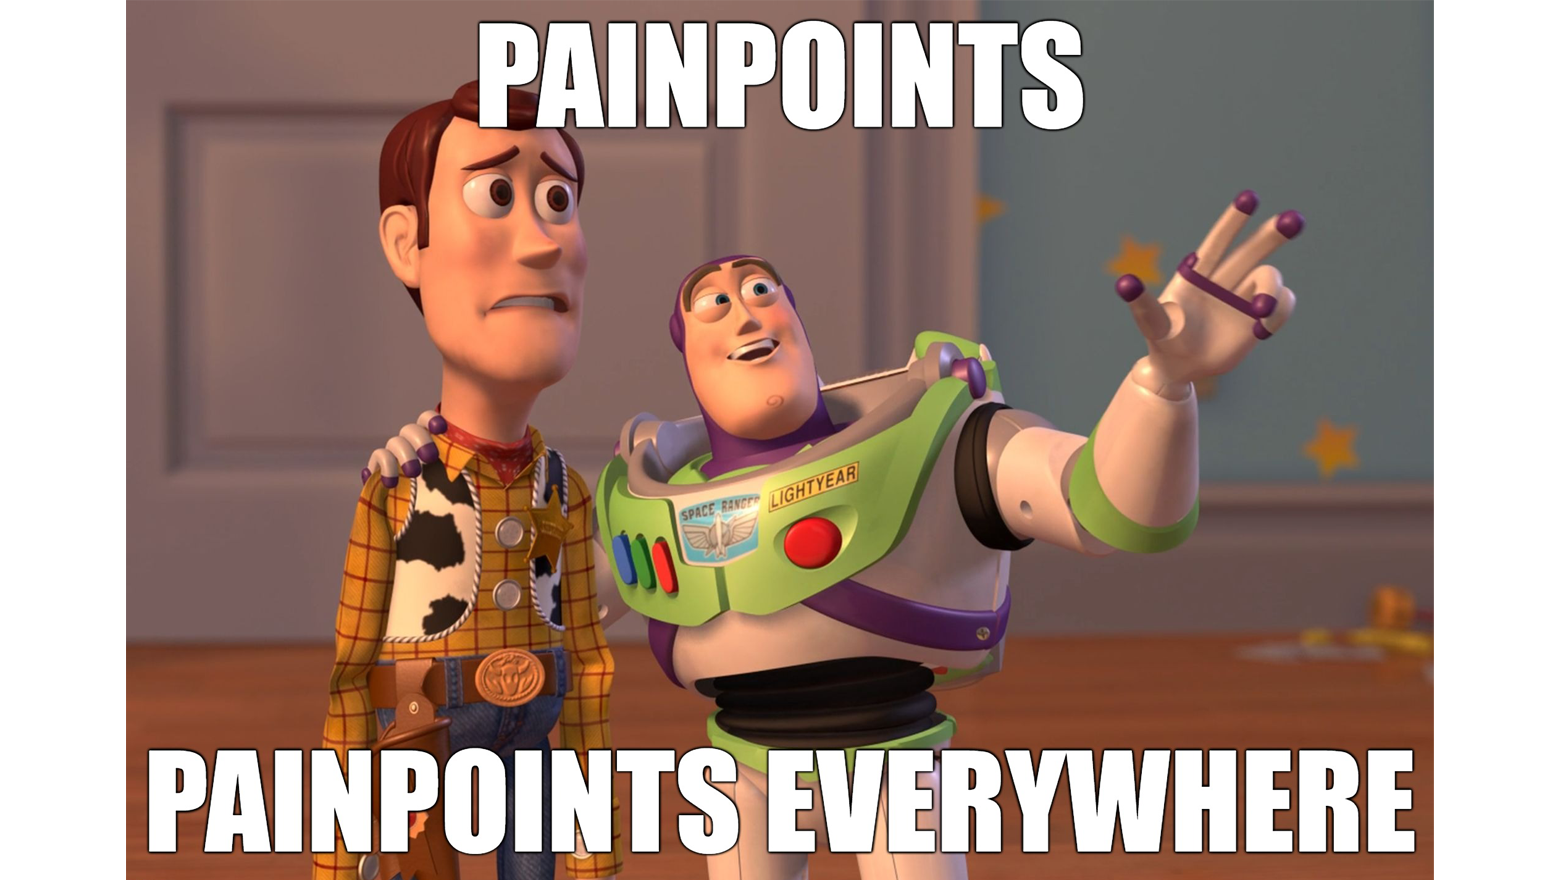 Toy story meme: Pain points. Pain points everywhere